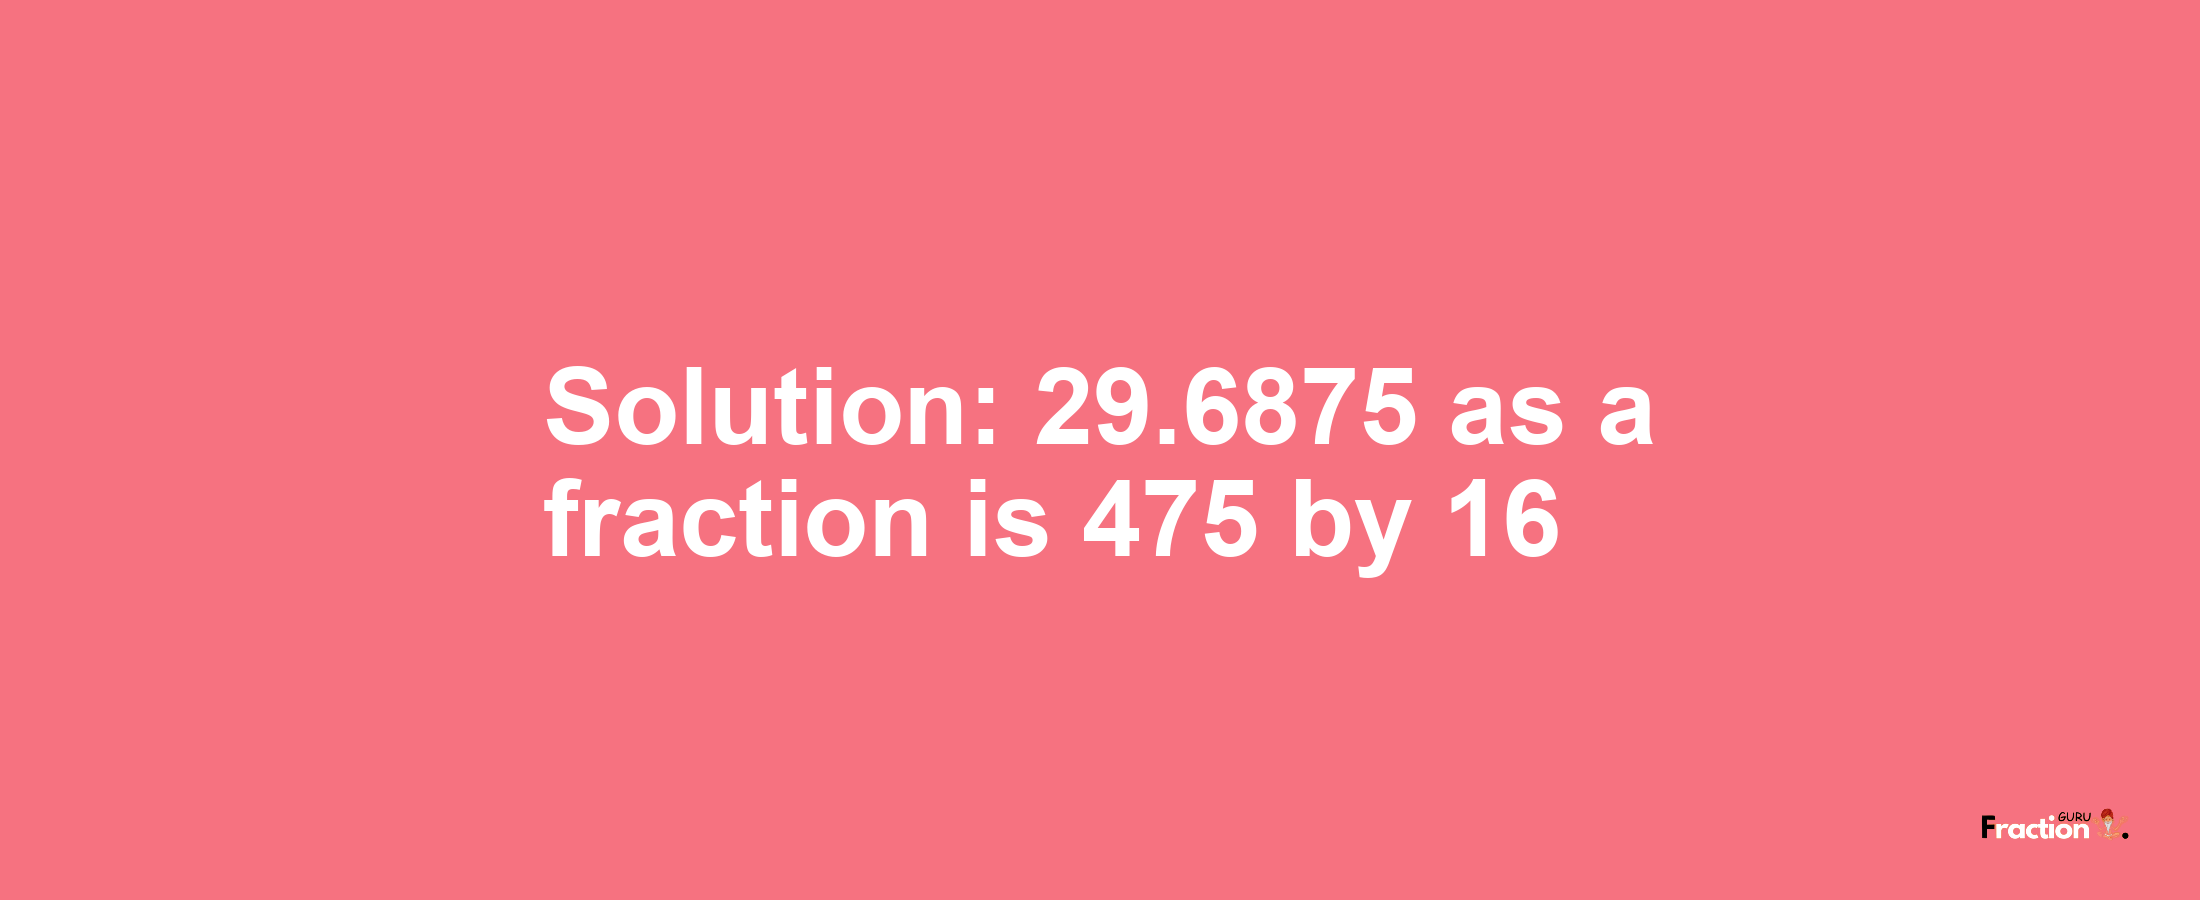 Solution:29.6875 as a fraction is 475/16